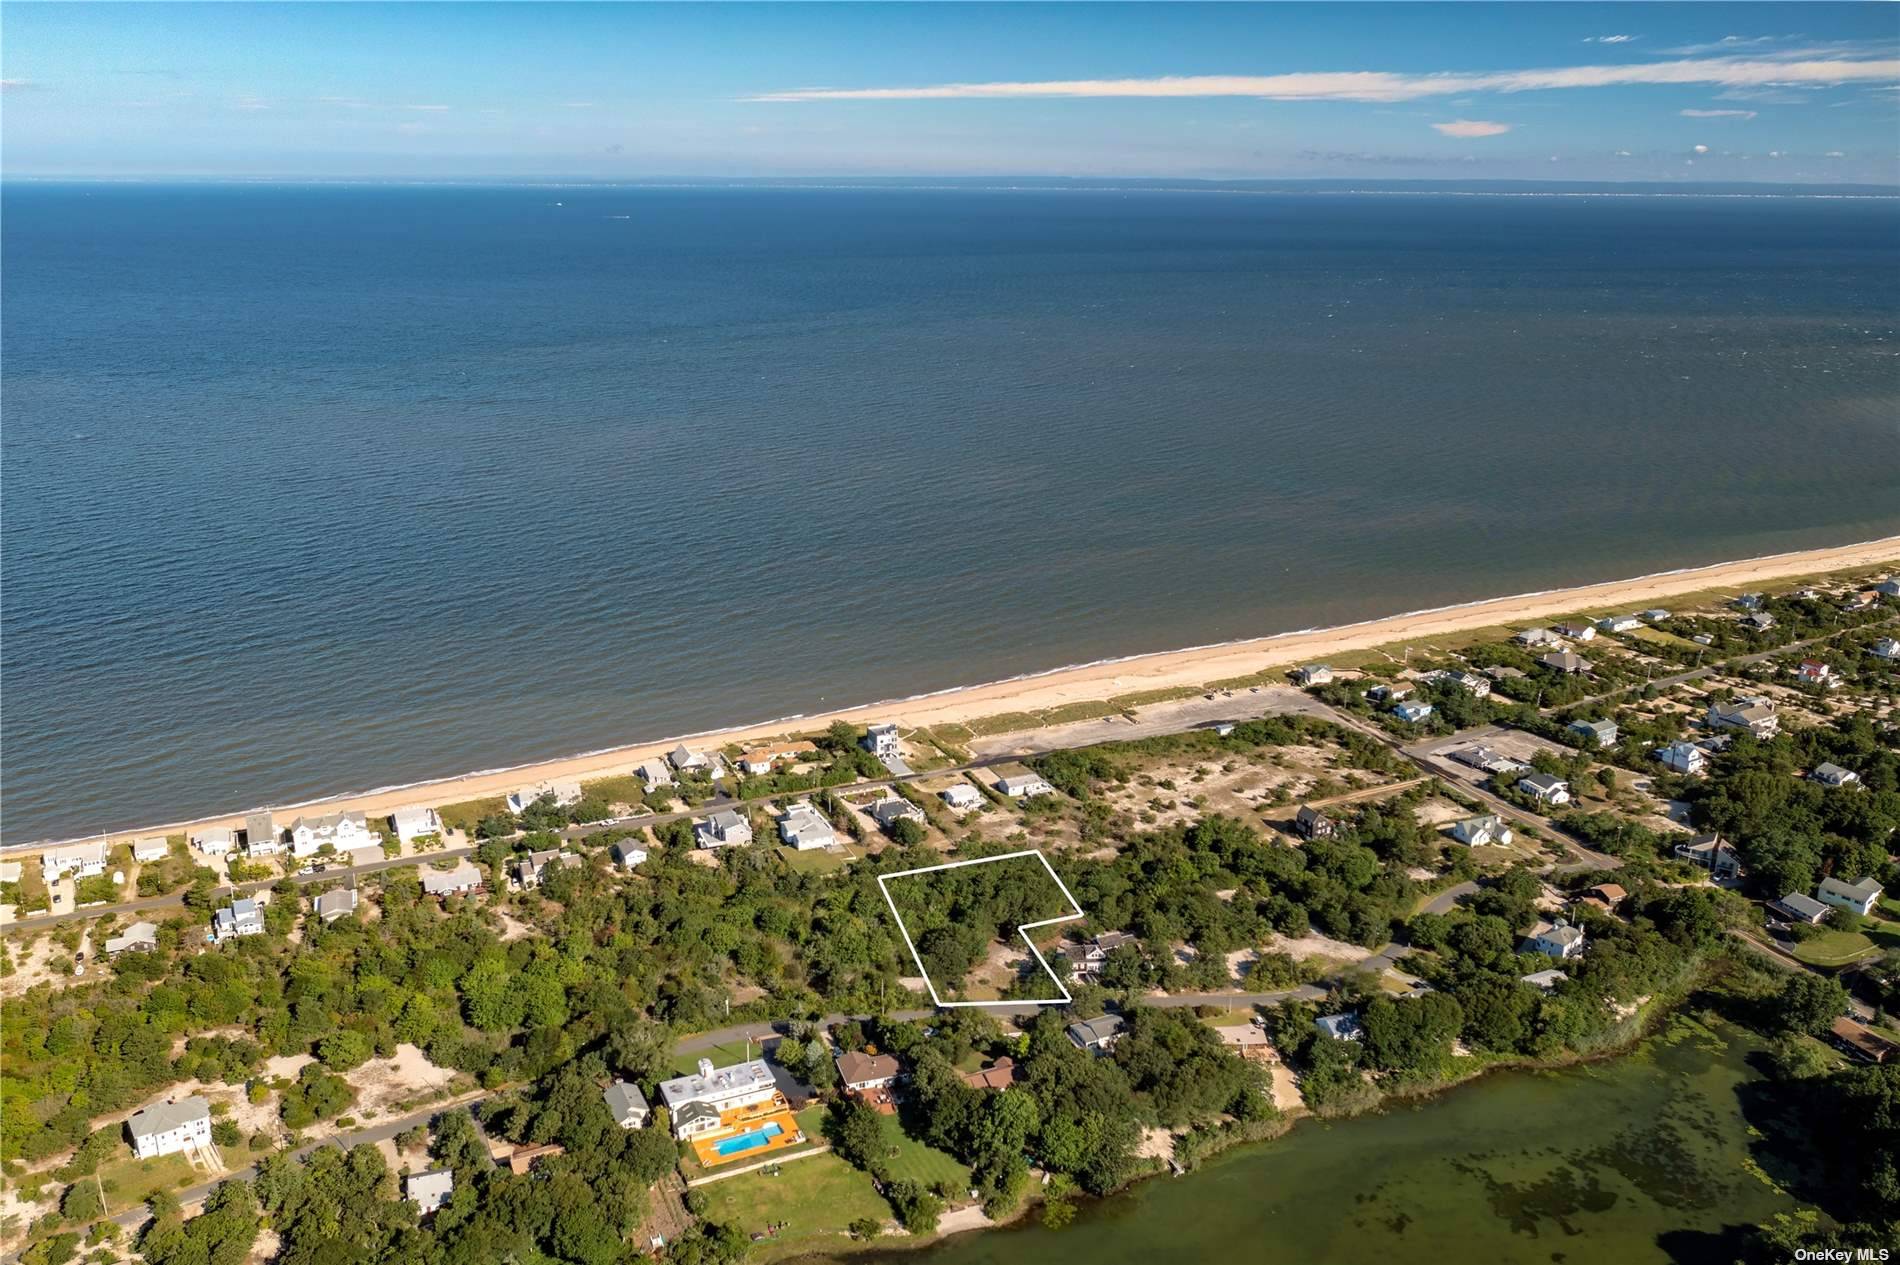 Take in all the North Fork has to offer while in a quiet beach community a block from Kenney's Road Beach, which spans 3 miles from Horton's lighthouse to Goldsmith ...